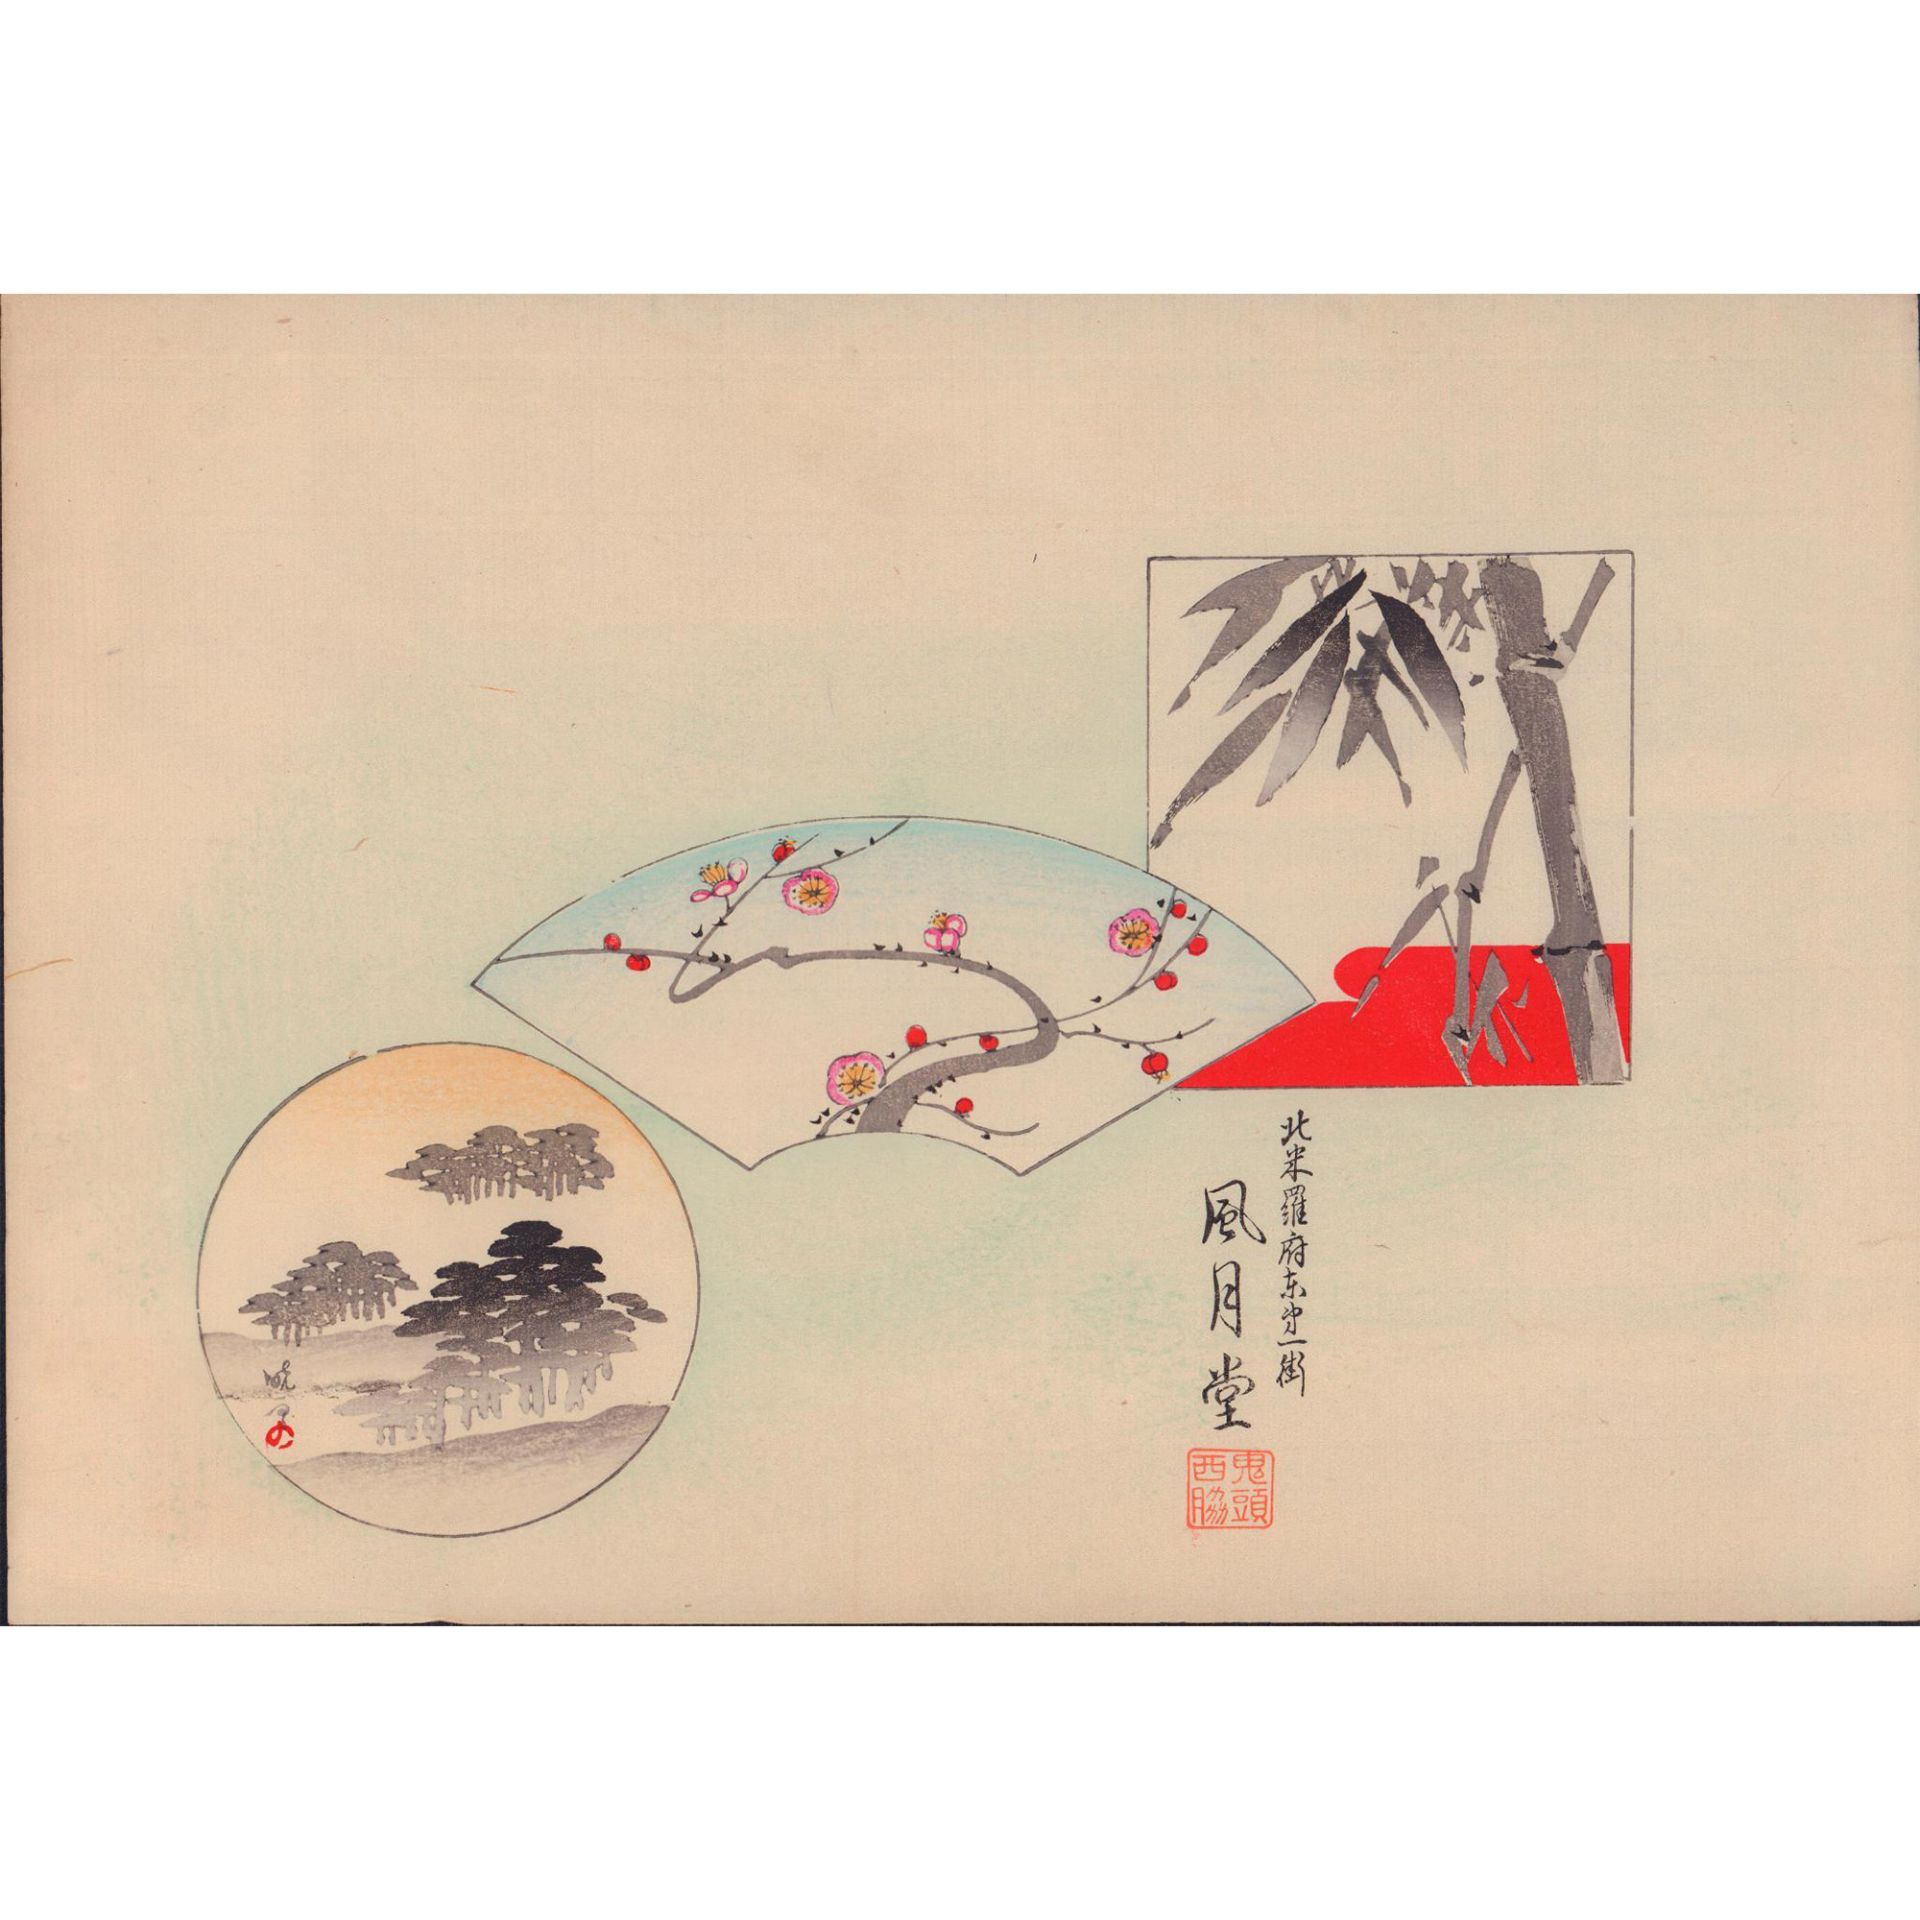 2pc Japanese Woodblock Prints on Paper - Image 2 of 2